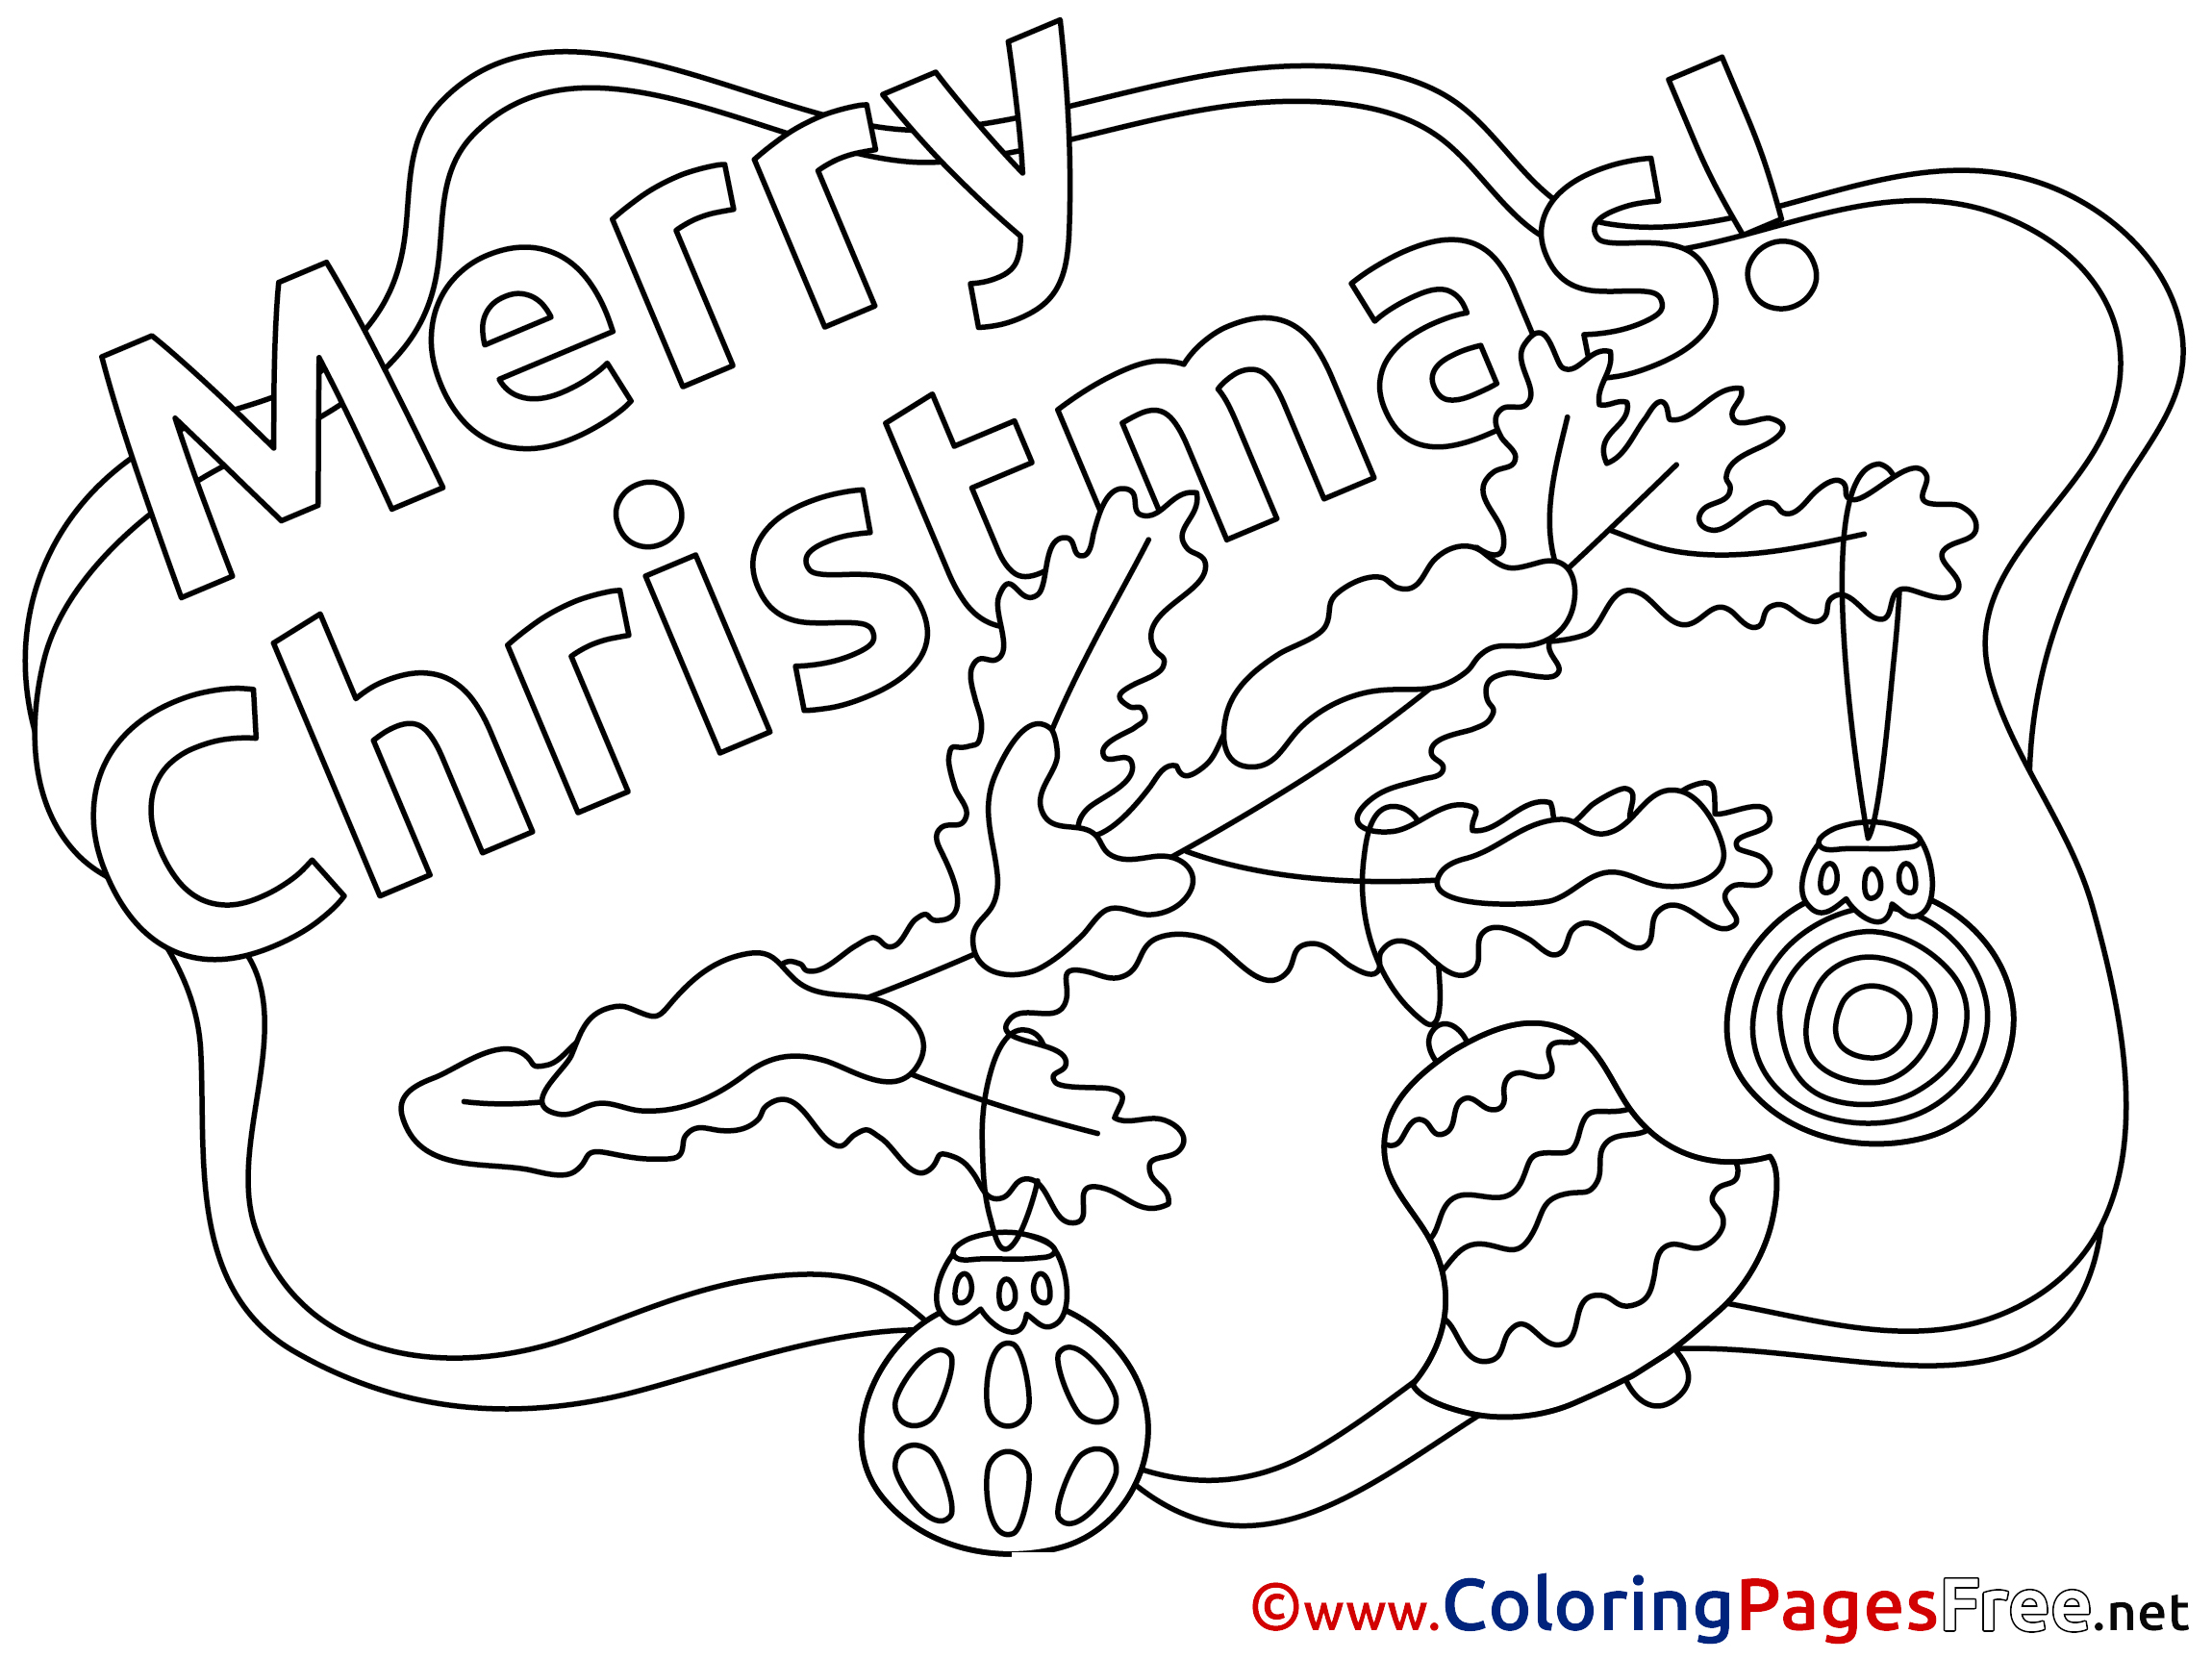 Branch Bell Toys Christmas Colouring Sheet free